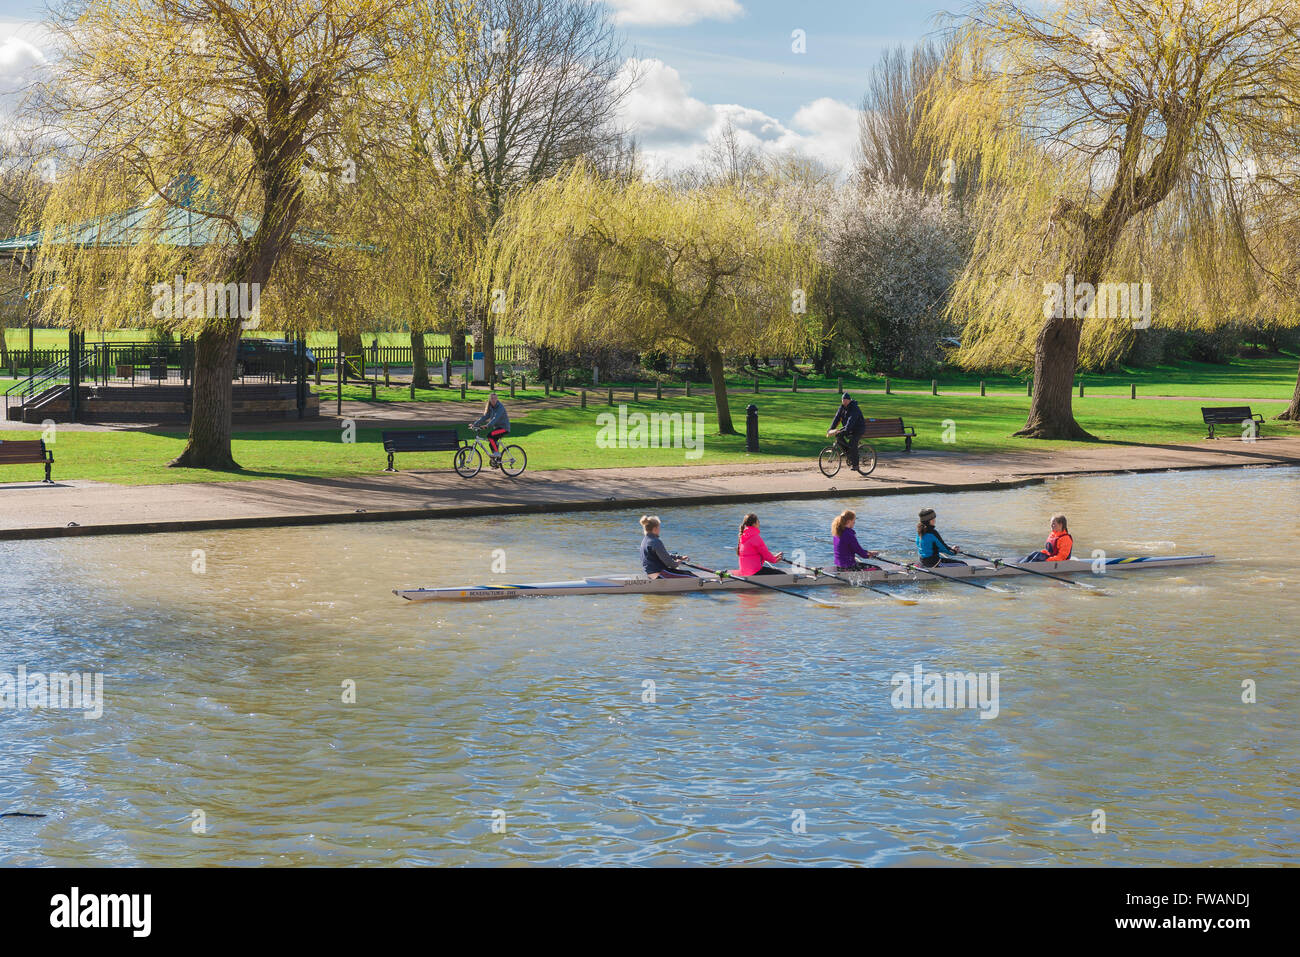 Women rowing, view of a women's rowing team training on the River Avon in the centre of Stratford Upon Avon, England, UK. Stock Photo